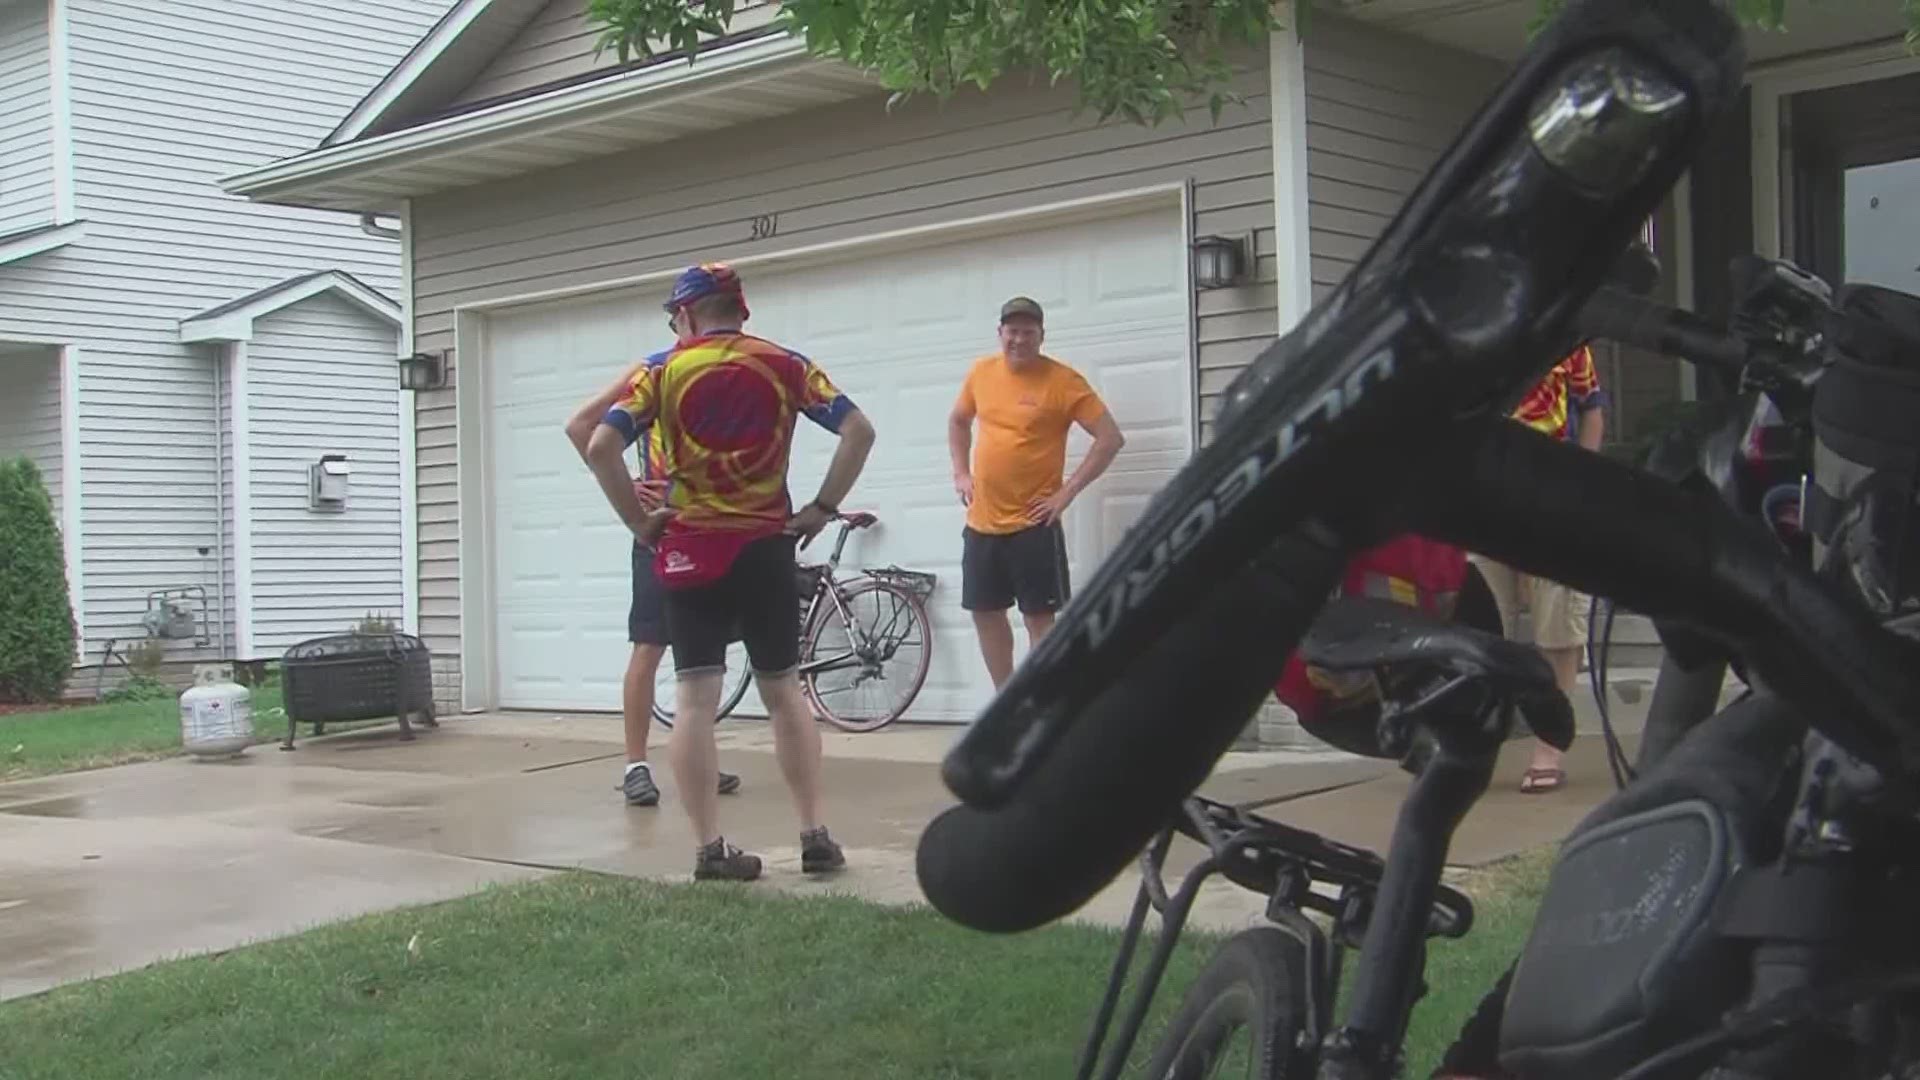 Team Love Shack got their RAGBRAI team together to still enjoy the best parts of the ride. Meanwhile, they'll look forward to 2021 and RAGBRAI's return.